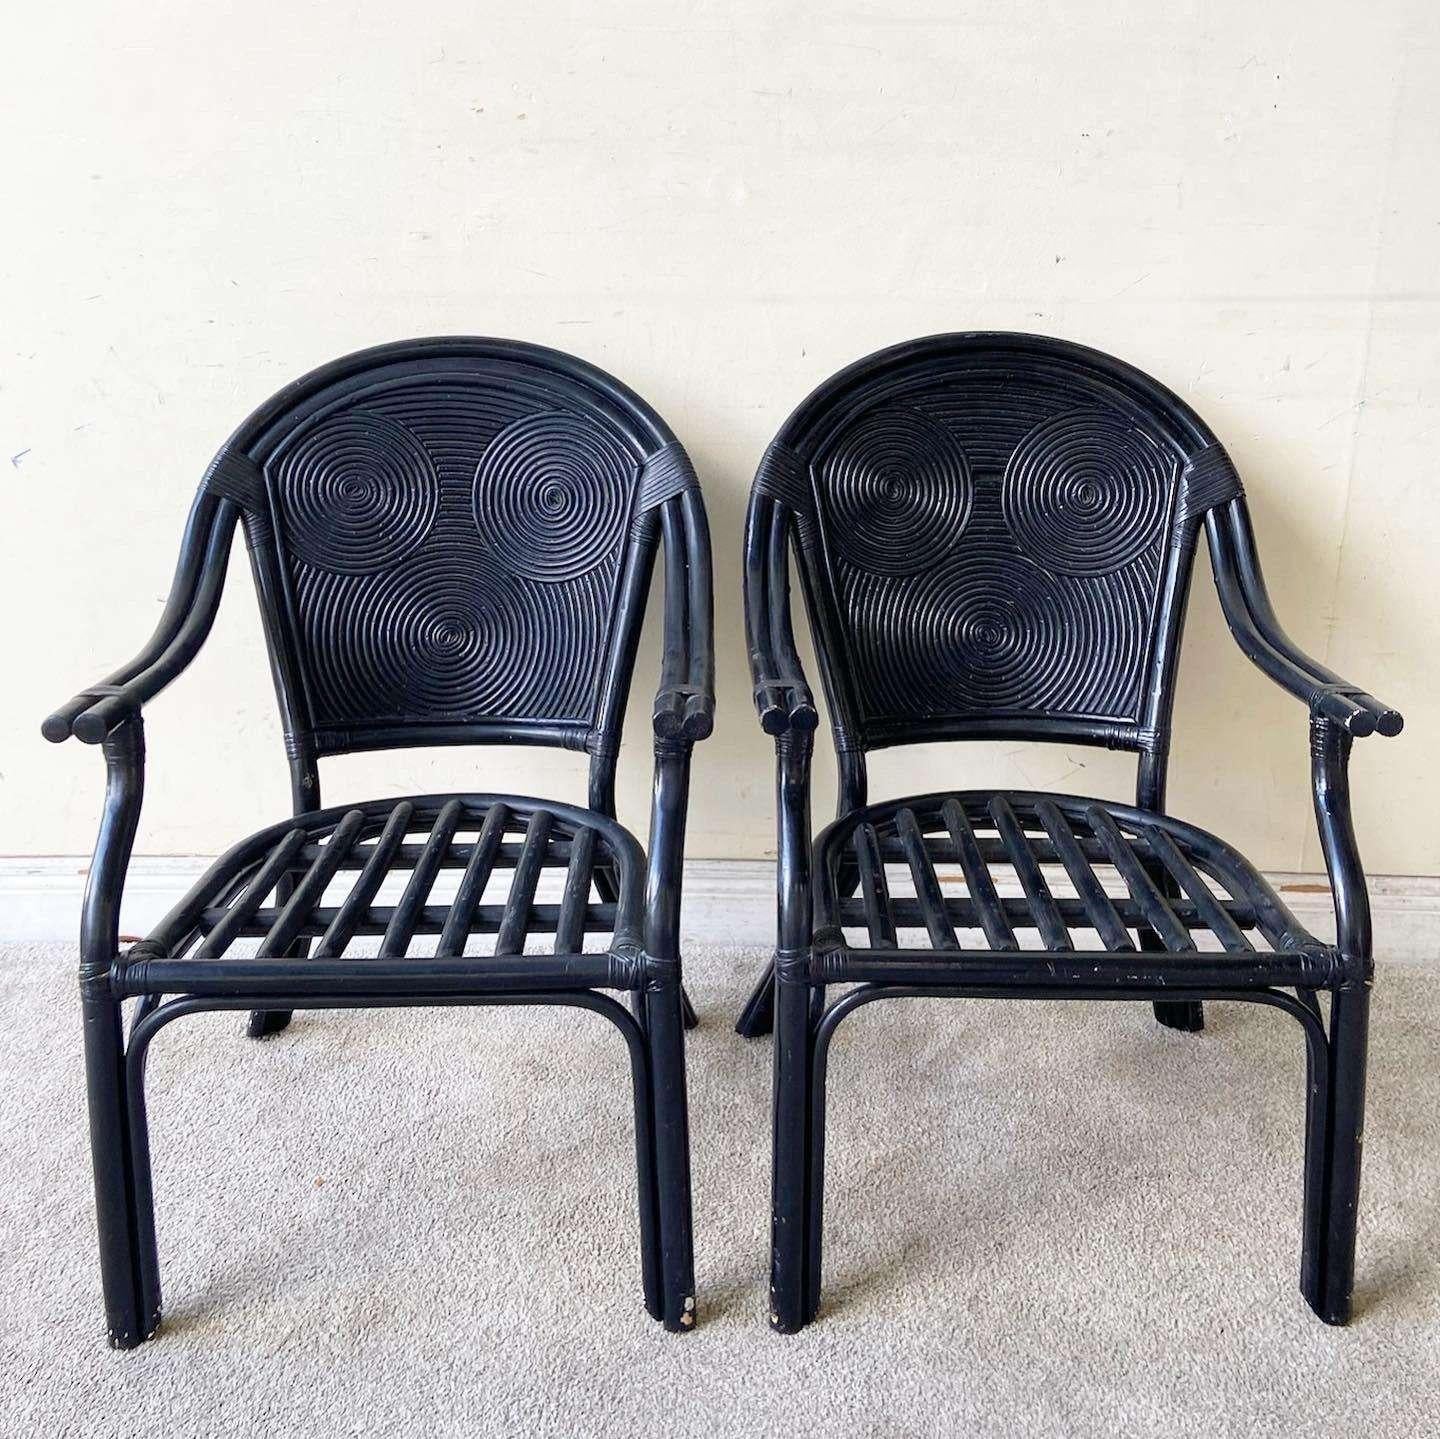 Late 20th Century Boho Chic Black Pencil Reed Arm Chairs - a Pair For Sale